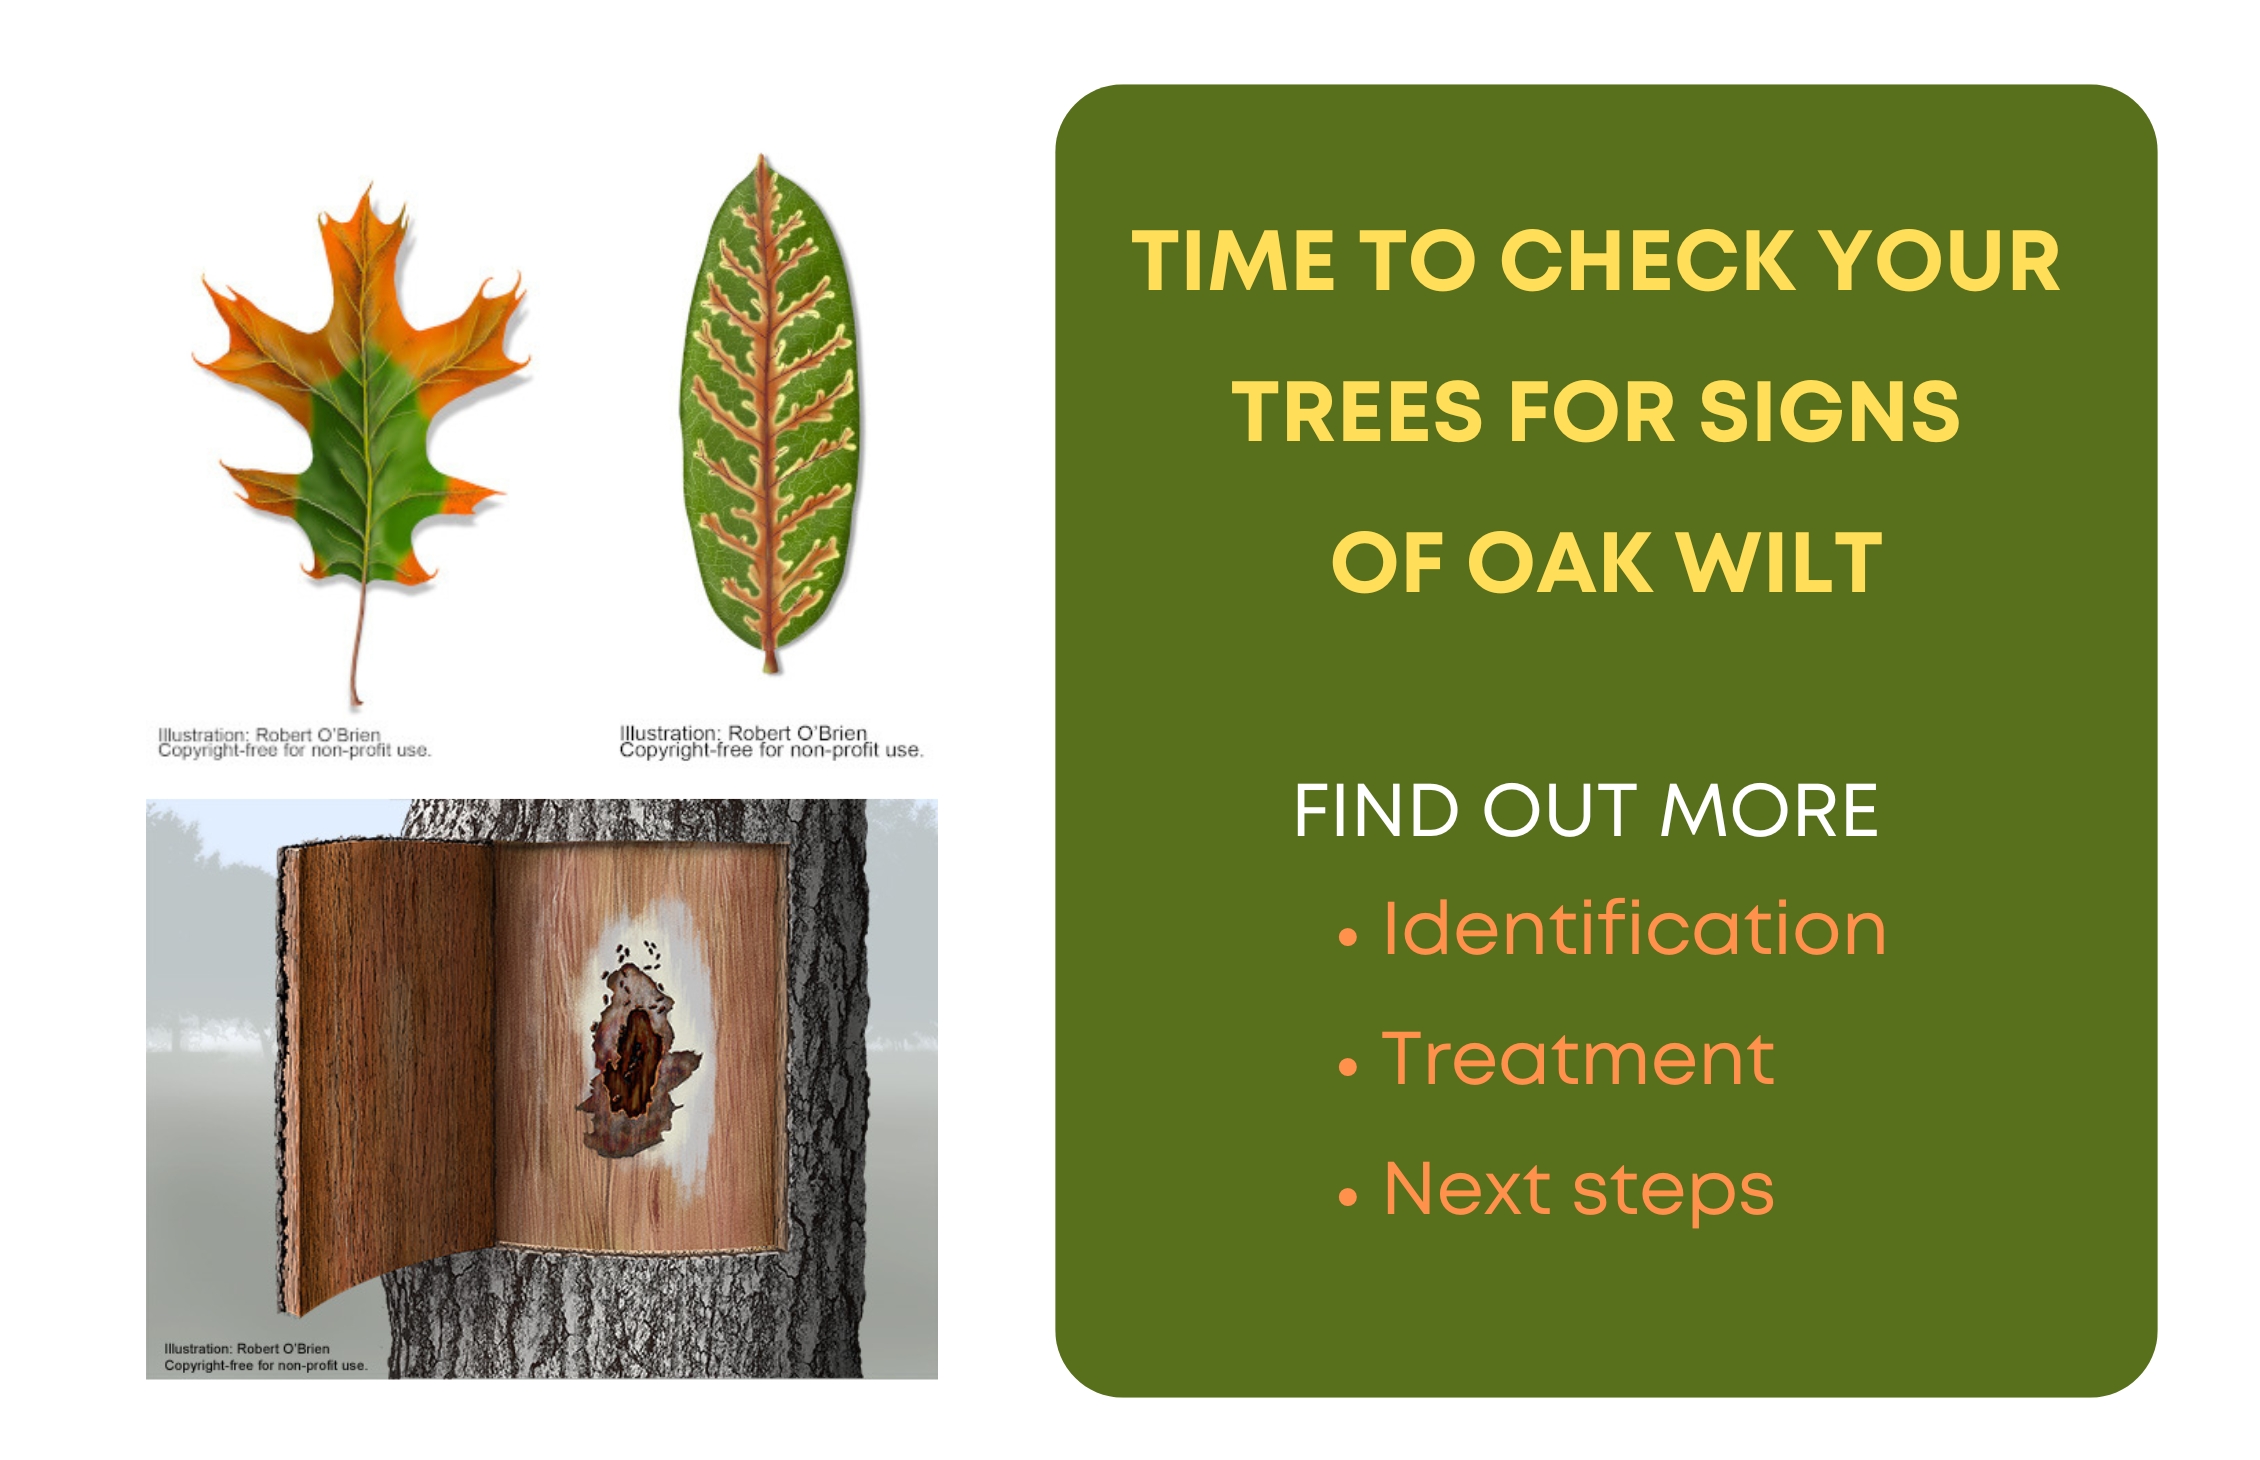 Check your trees for Oak Wilt!